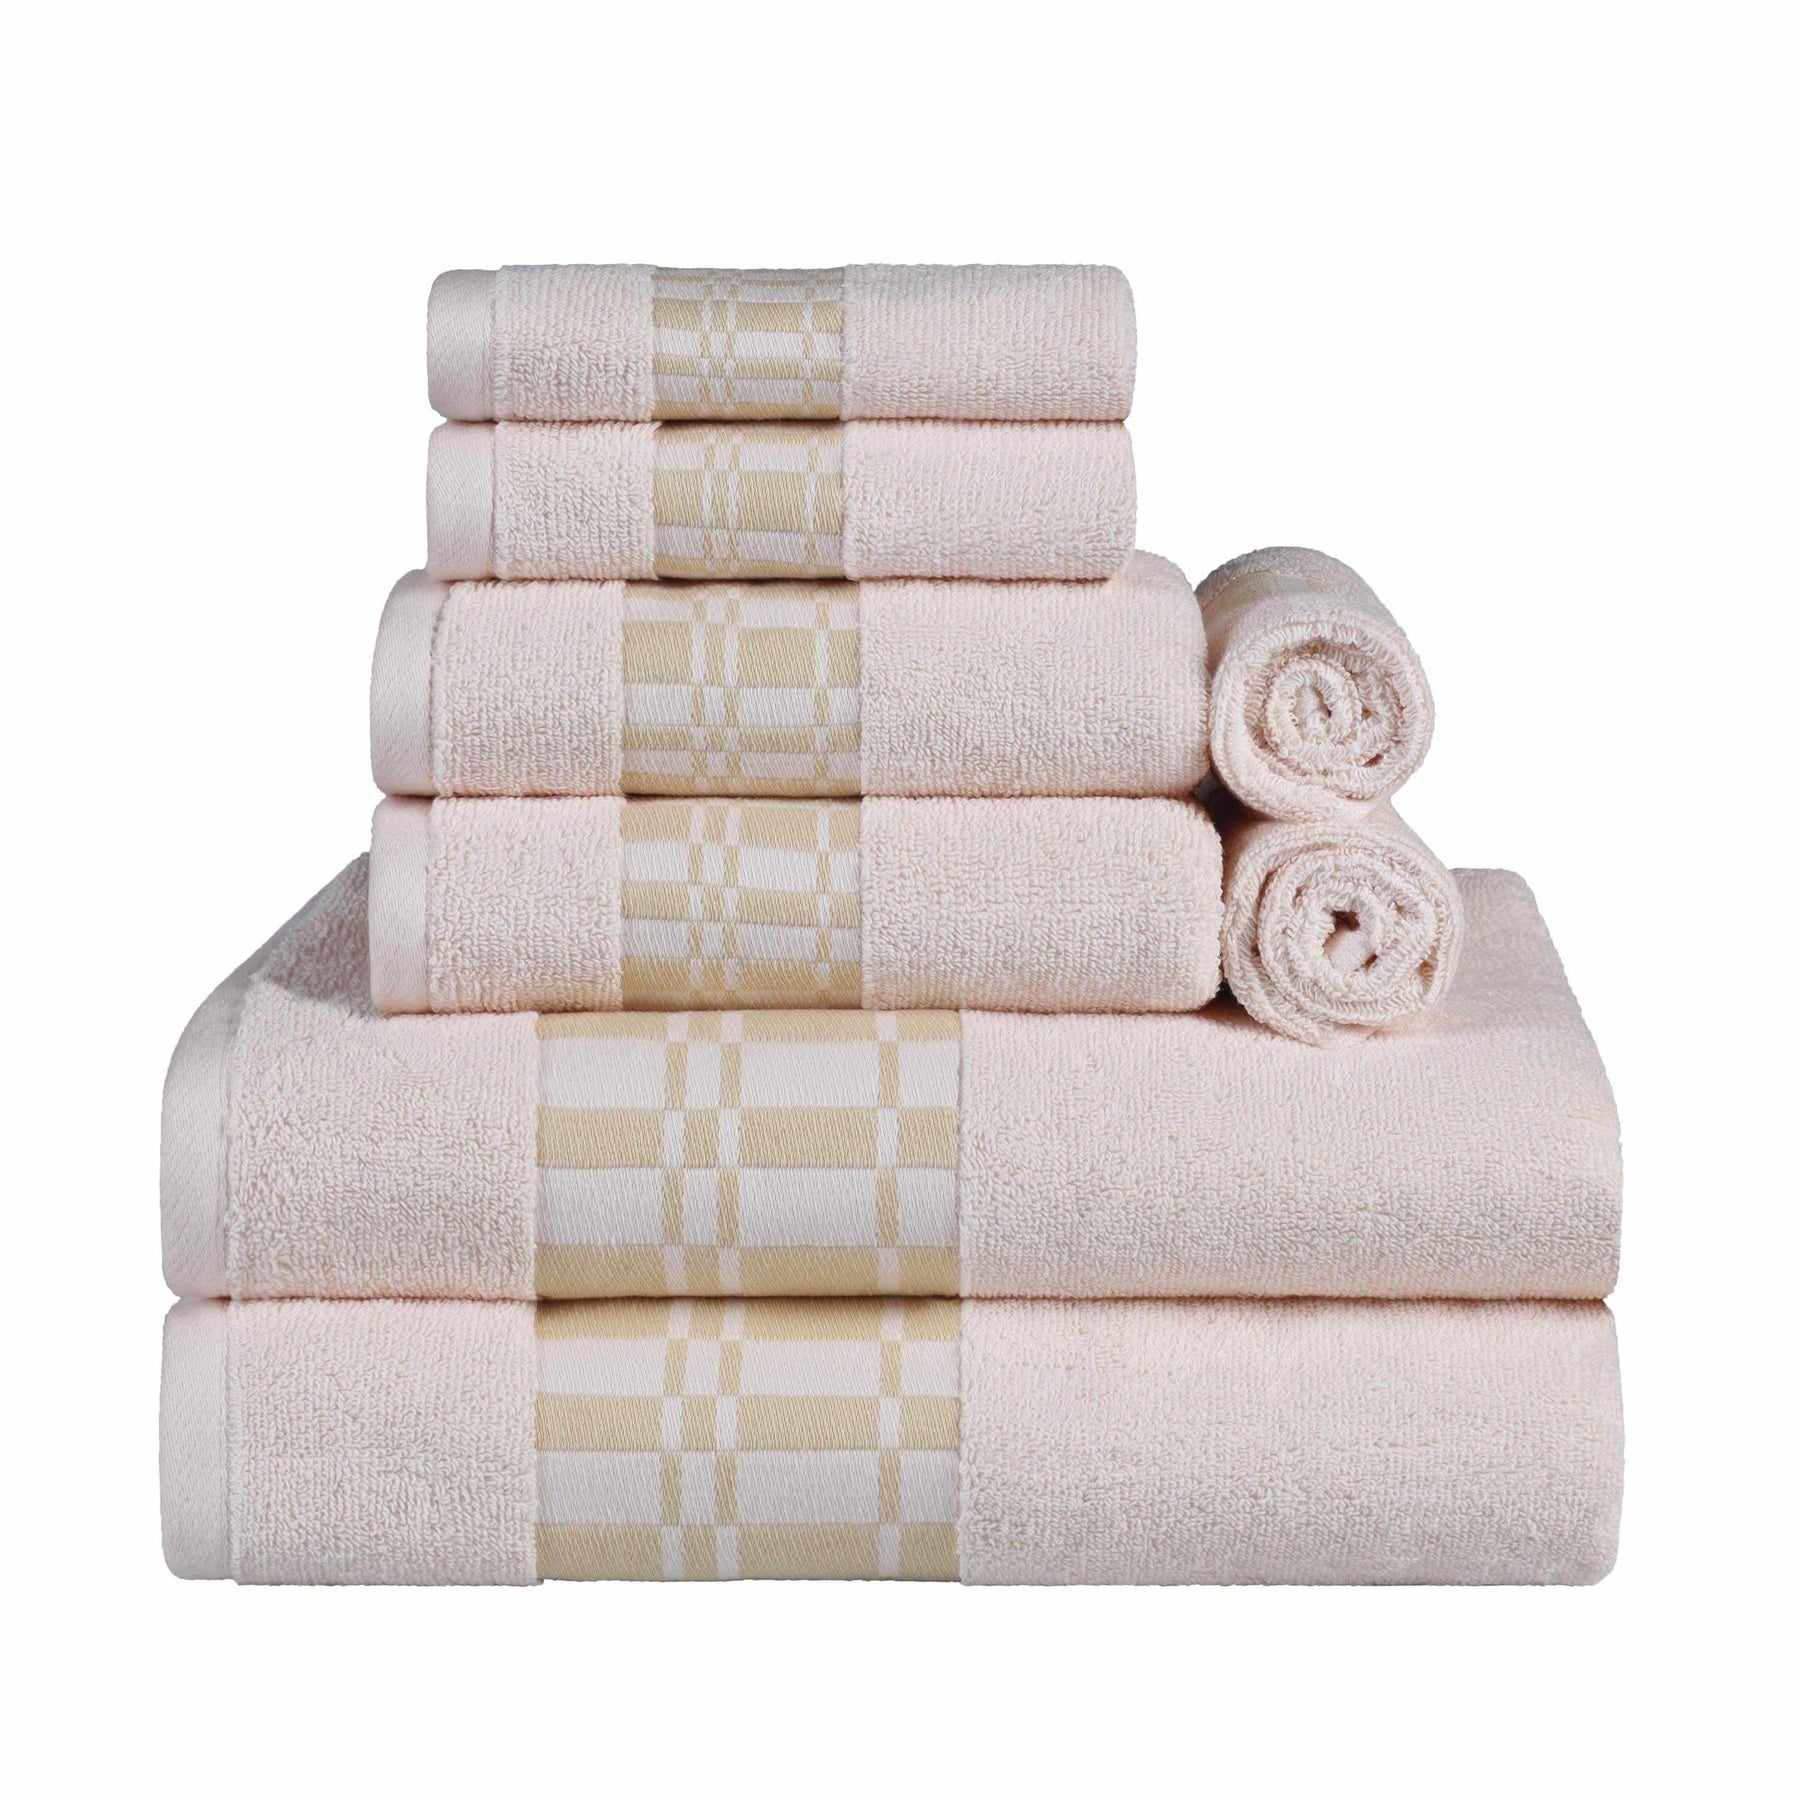  Superior Larissa Cotton 8-Piece Assorted Towel Set with Geometric Embroidered Jacquard Border - Ivory